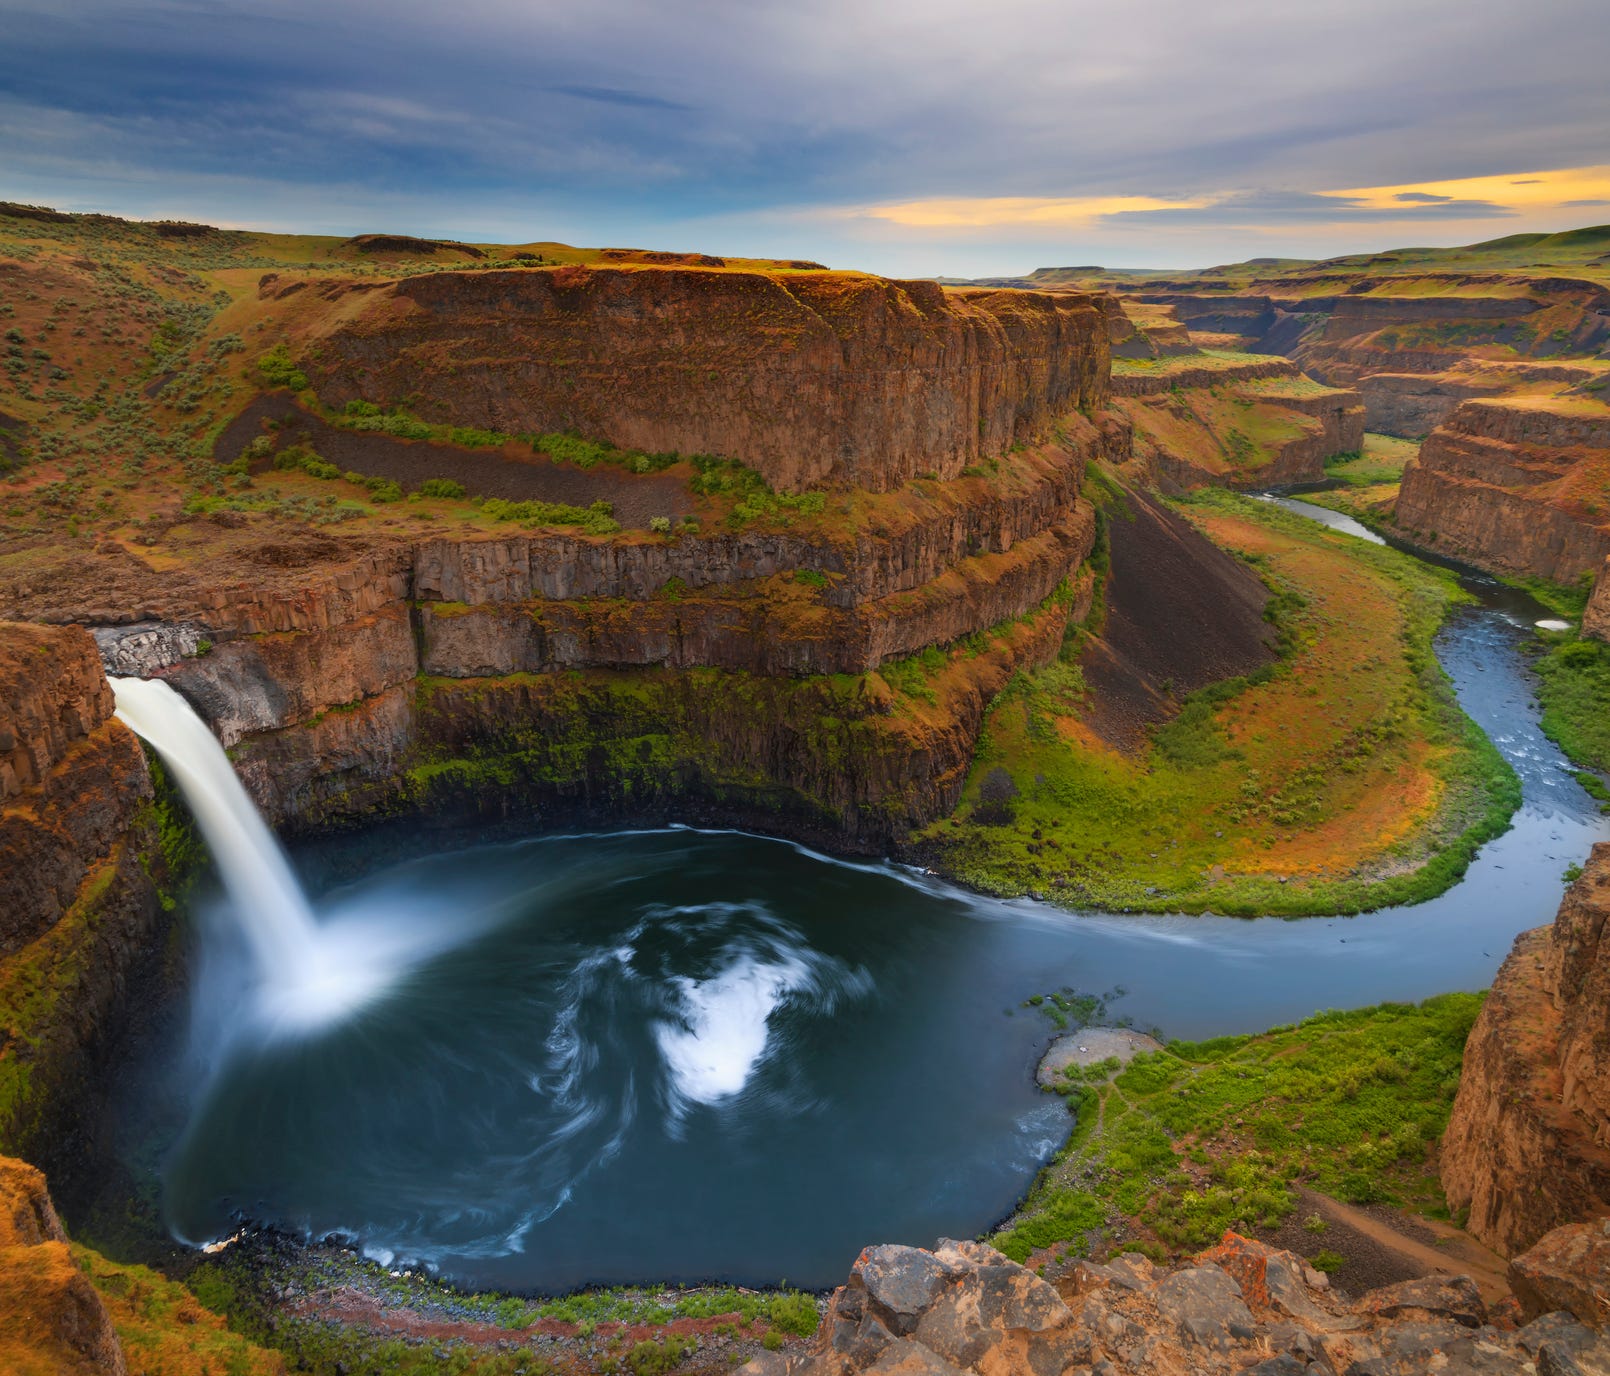 Palouse Falls, Washington: Washington's Palouse River flows southwest until it drops down into a canyon, creating the impressive spectacle known as Palouse Falls. The waterfall is located in the 105-acre Palouse Falls State Park, with campgrounds, tr